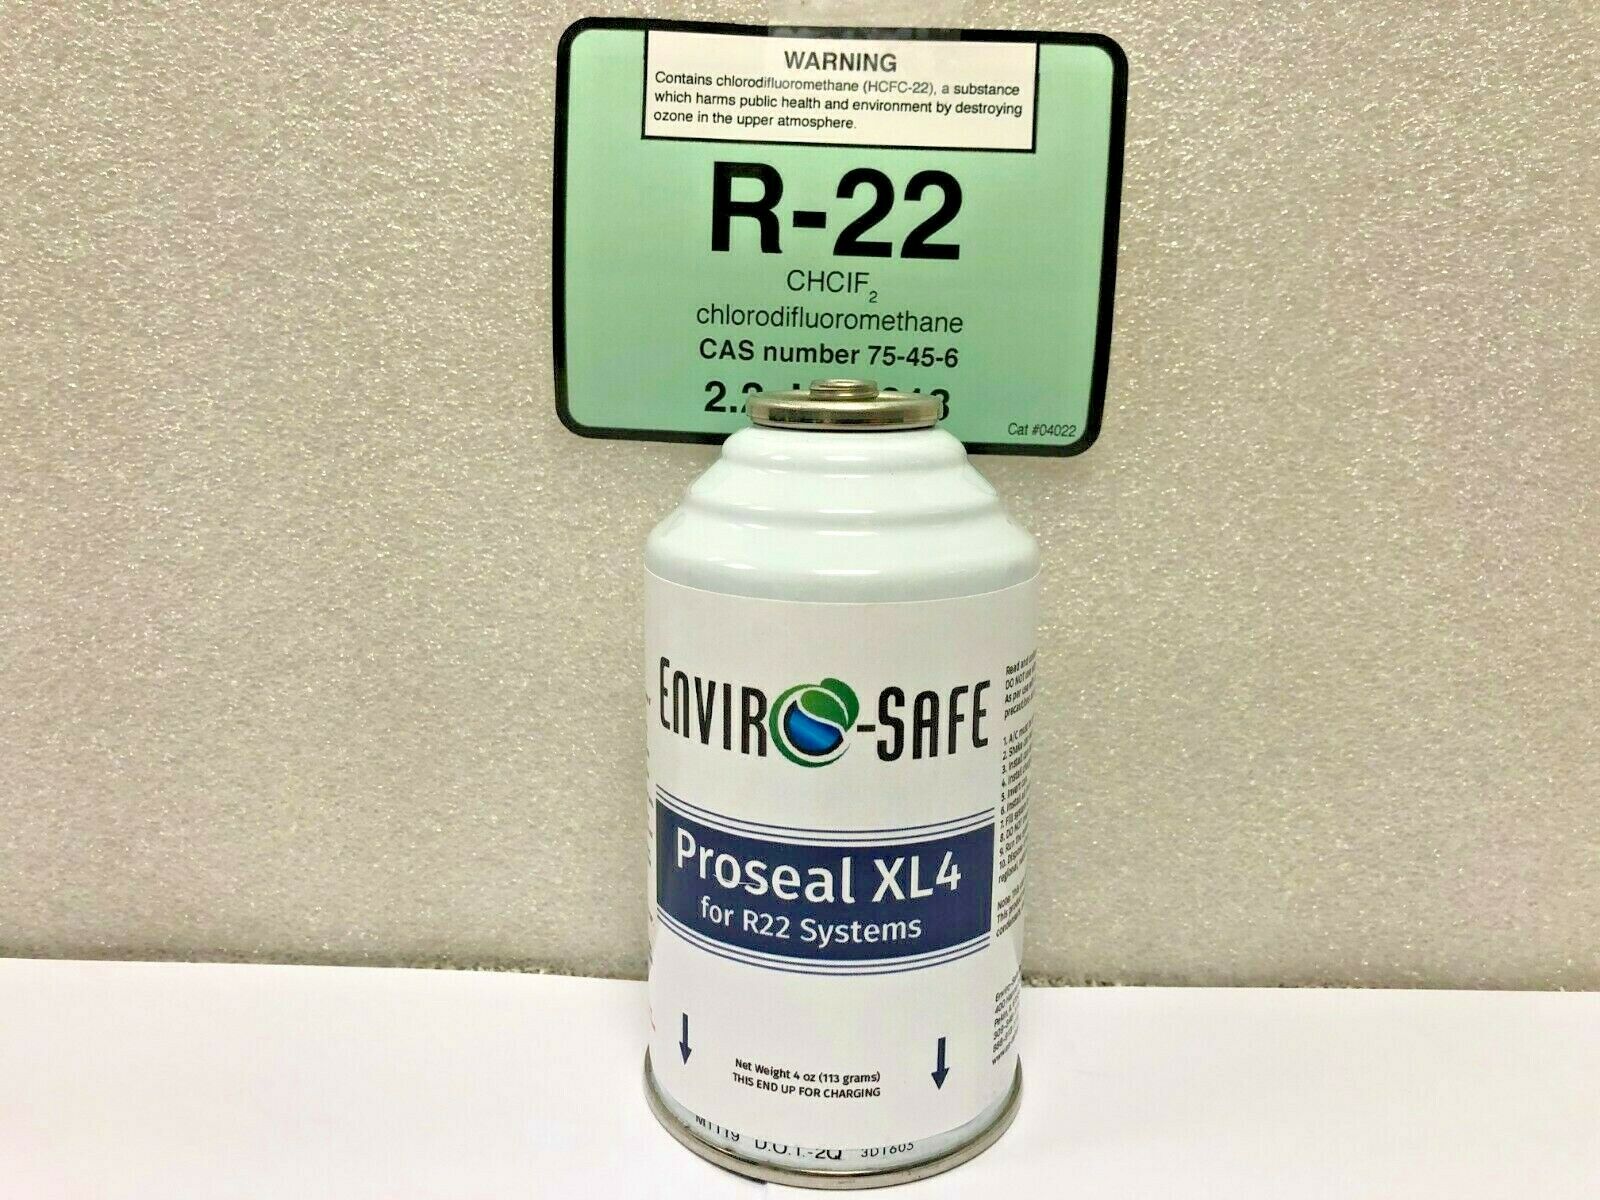 For R22 Refrigerant Systems, Proseal Xl4, Super Leak Stop For R22, (1) 4 Oz. Can